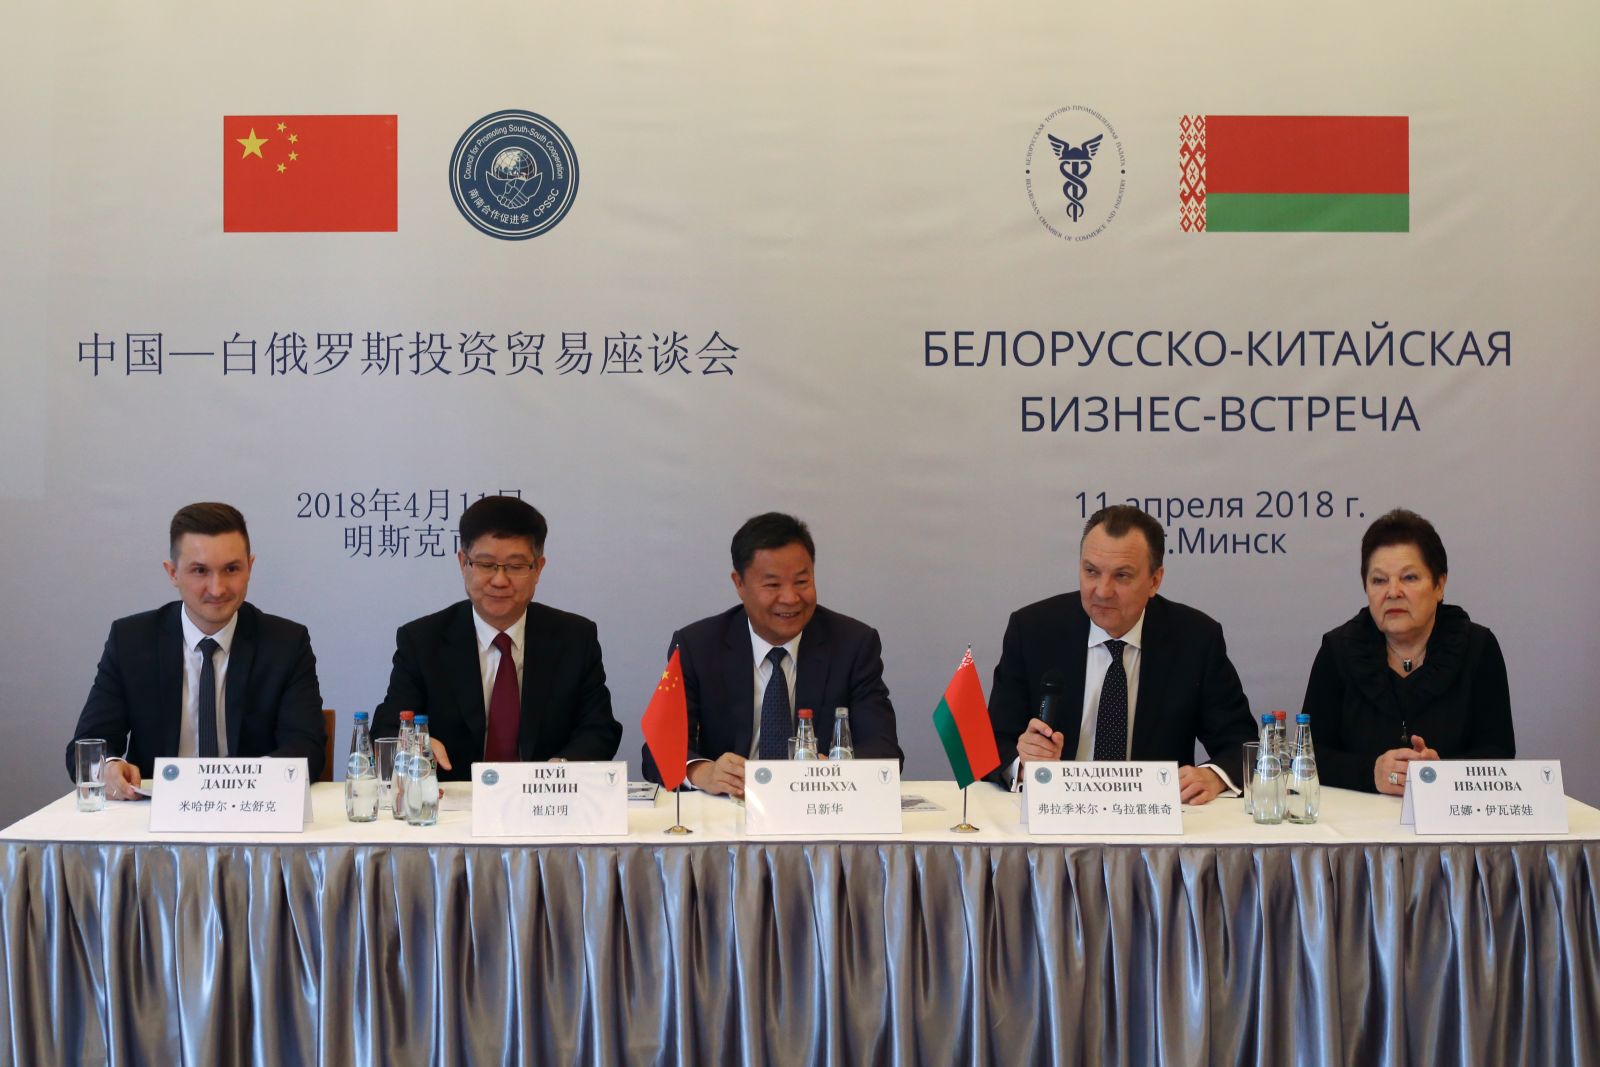 Belarus aims to step up defence cooperation with China